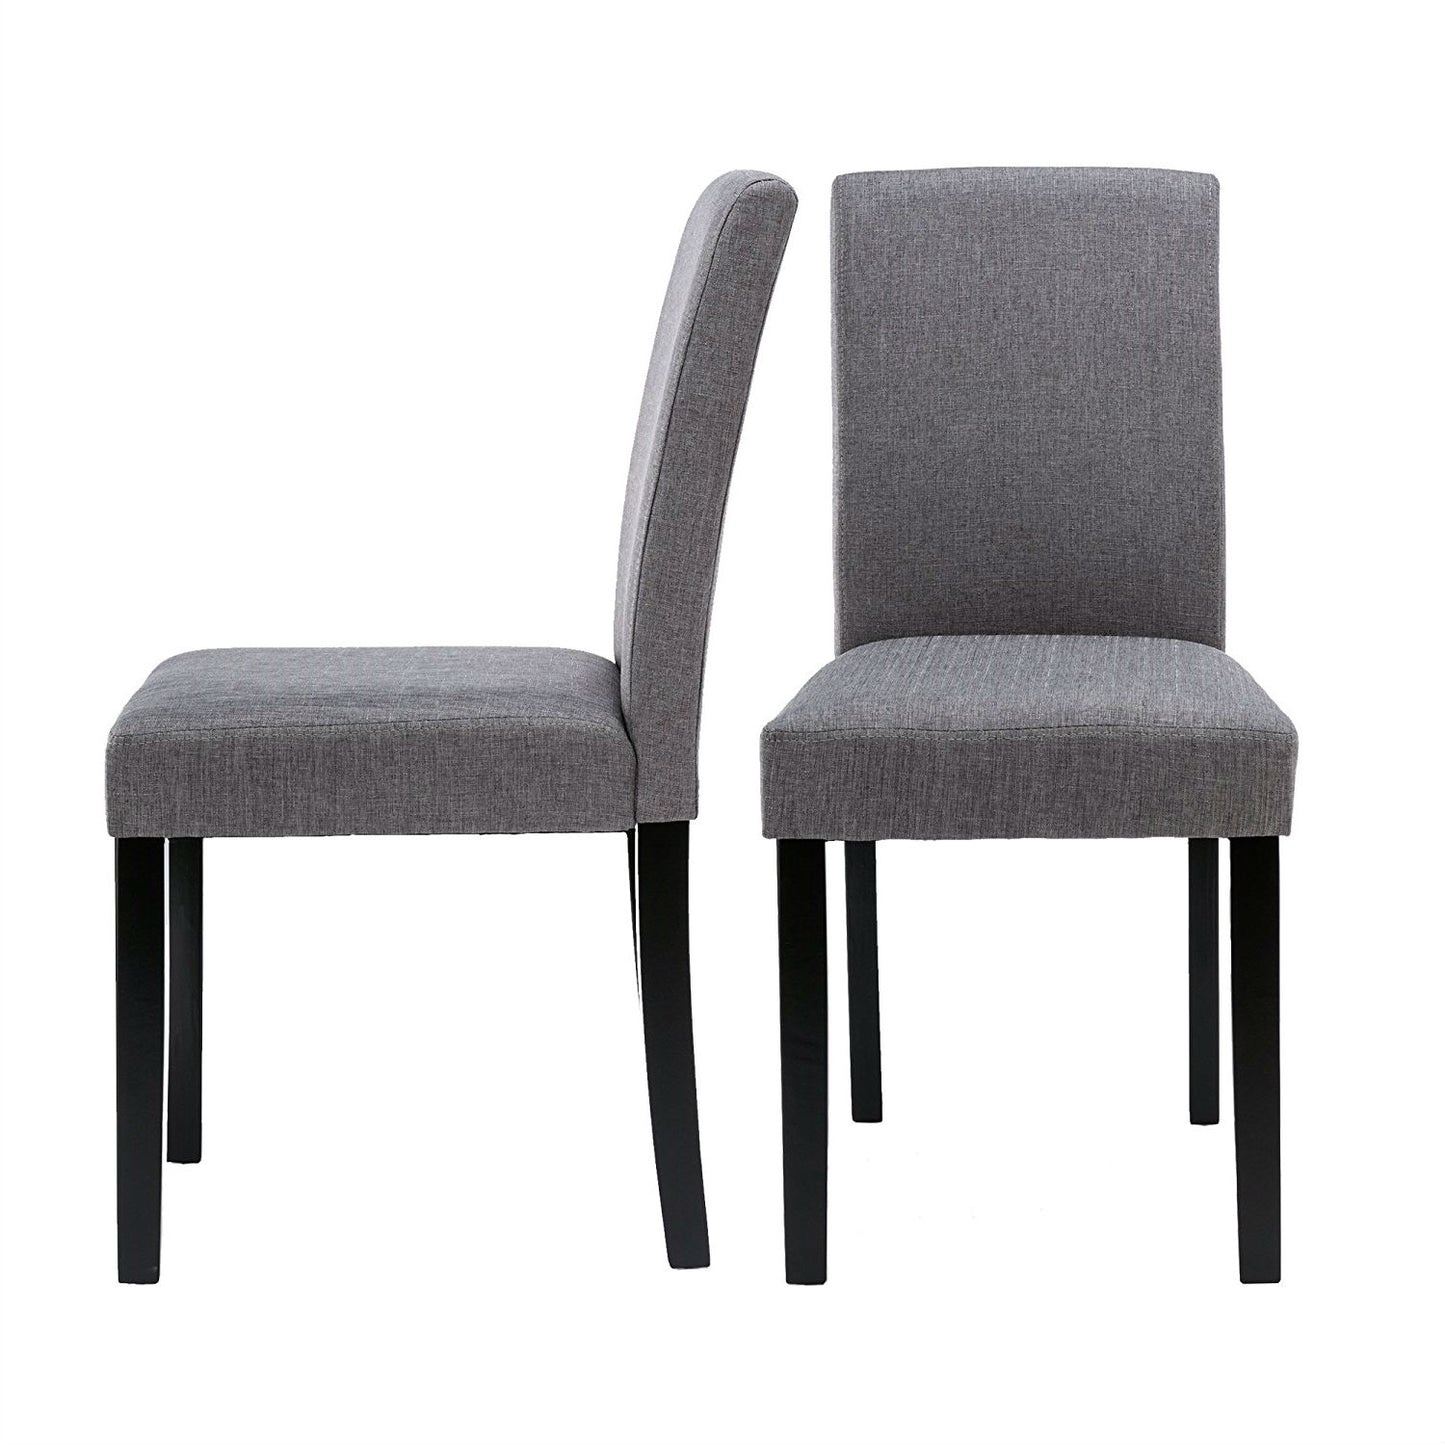 Set of 2 - Grey Fabric Dining Chairs with Black Wood Legs